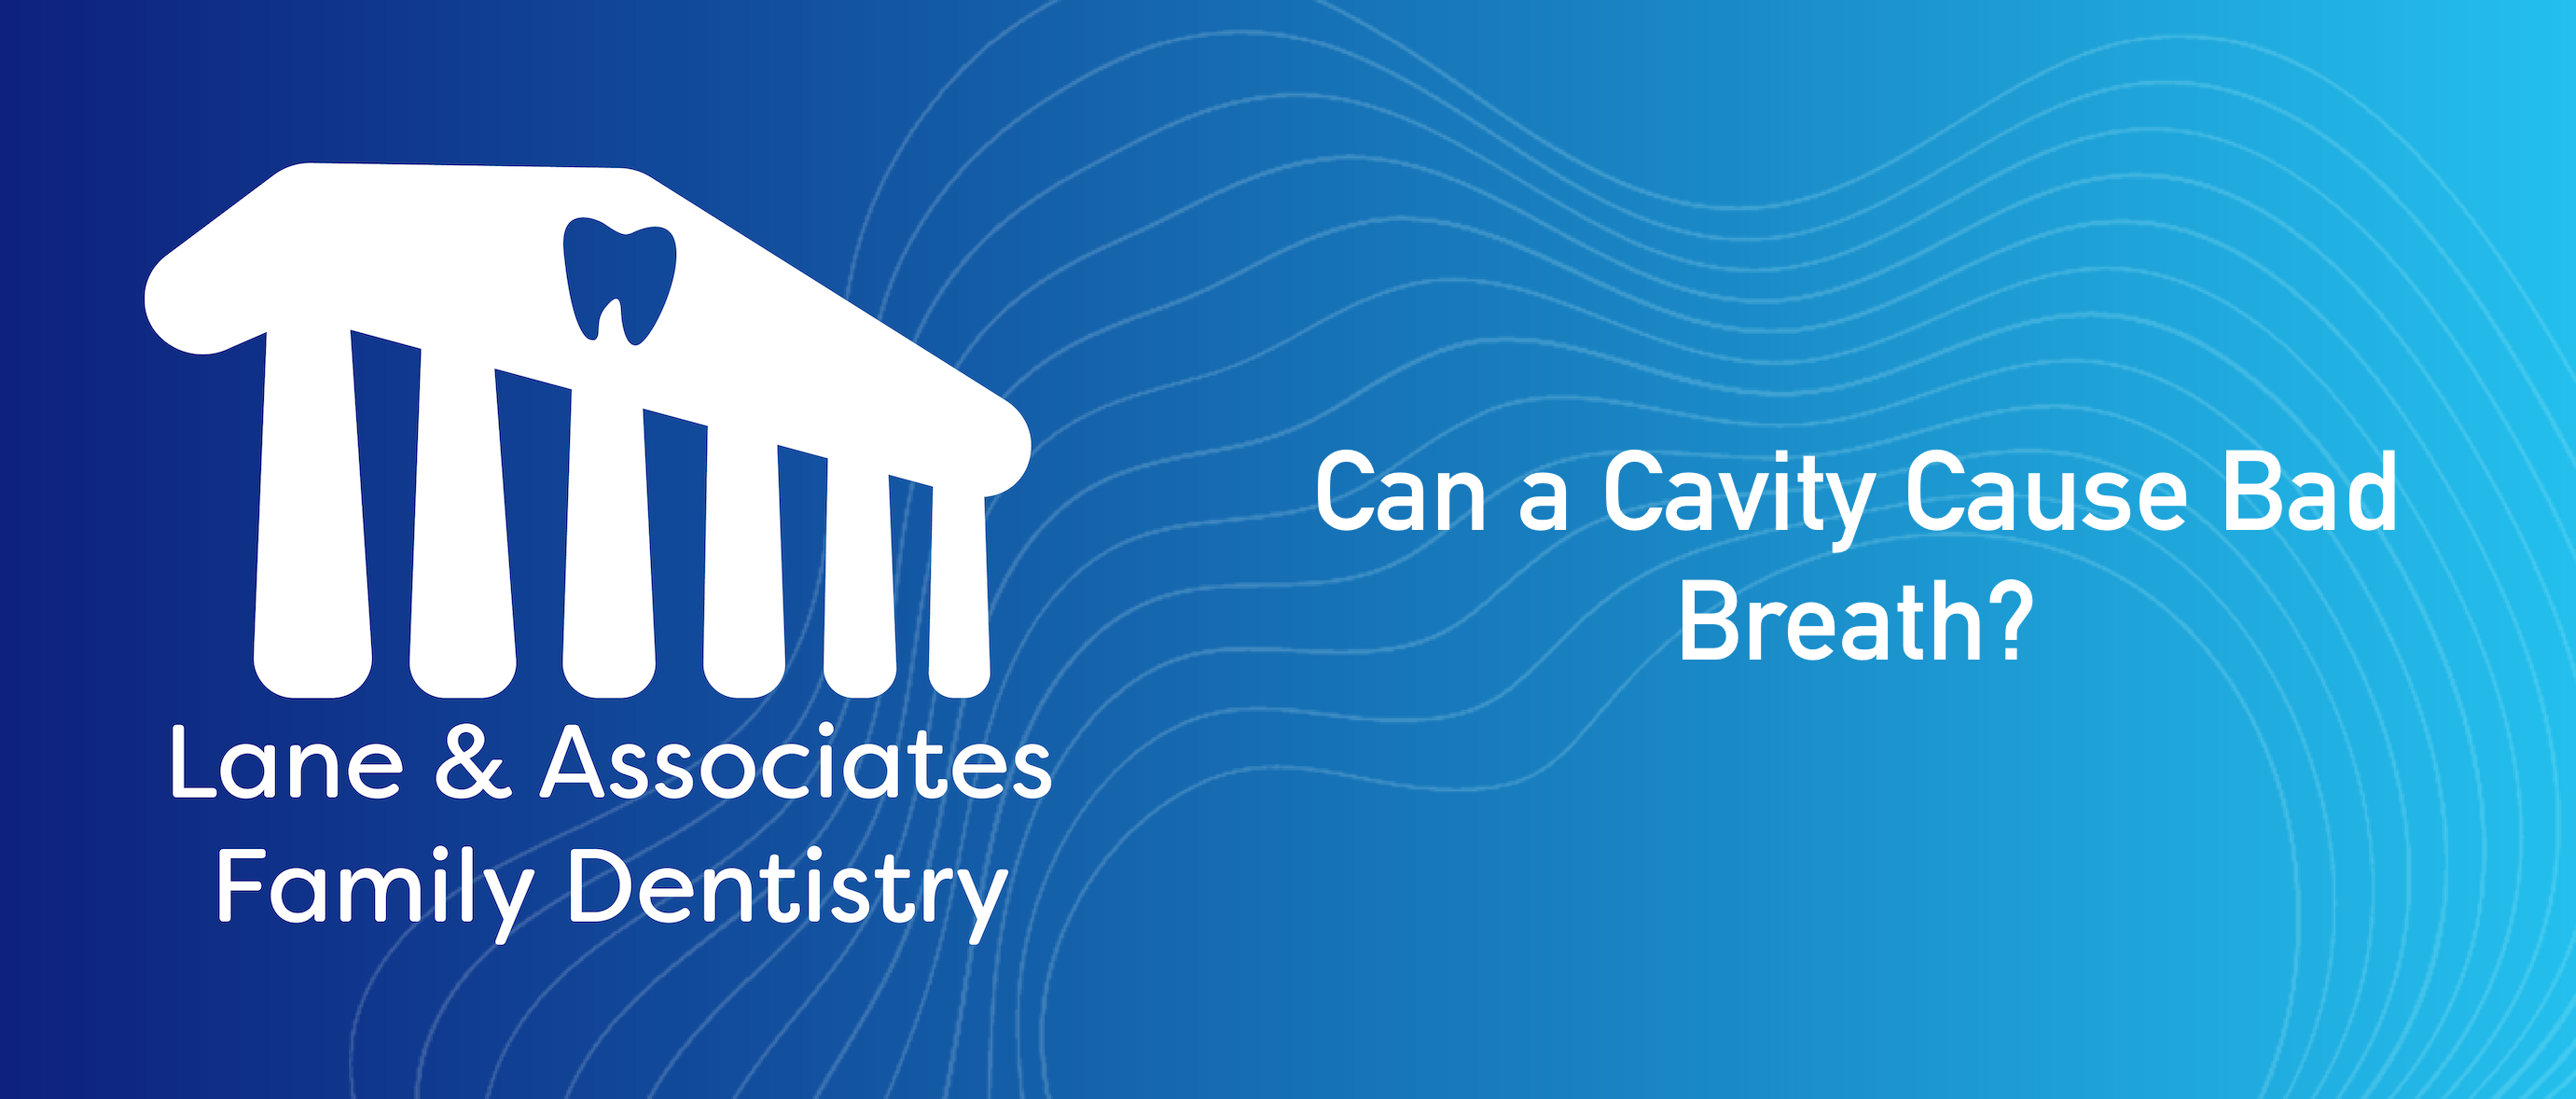 Can a Cavity Cause Bad Breath?